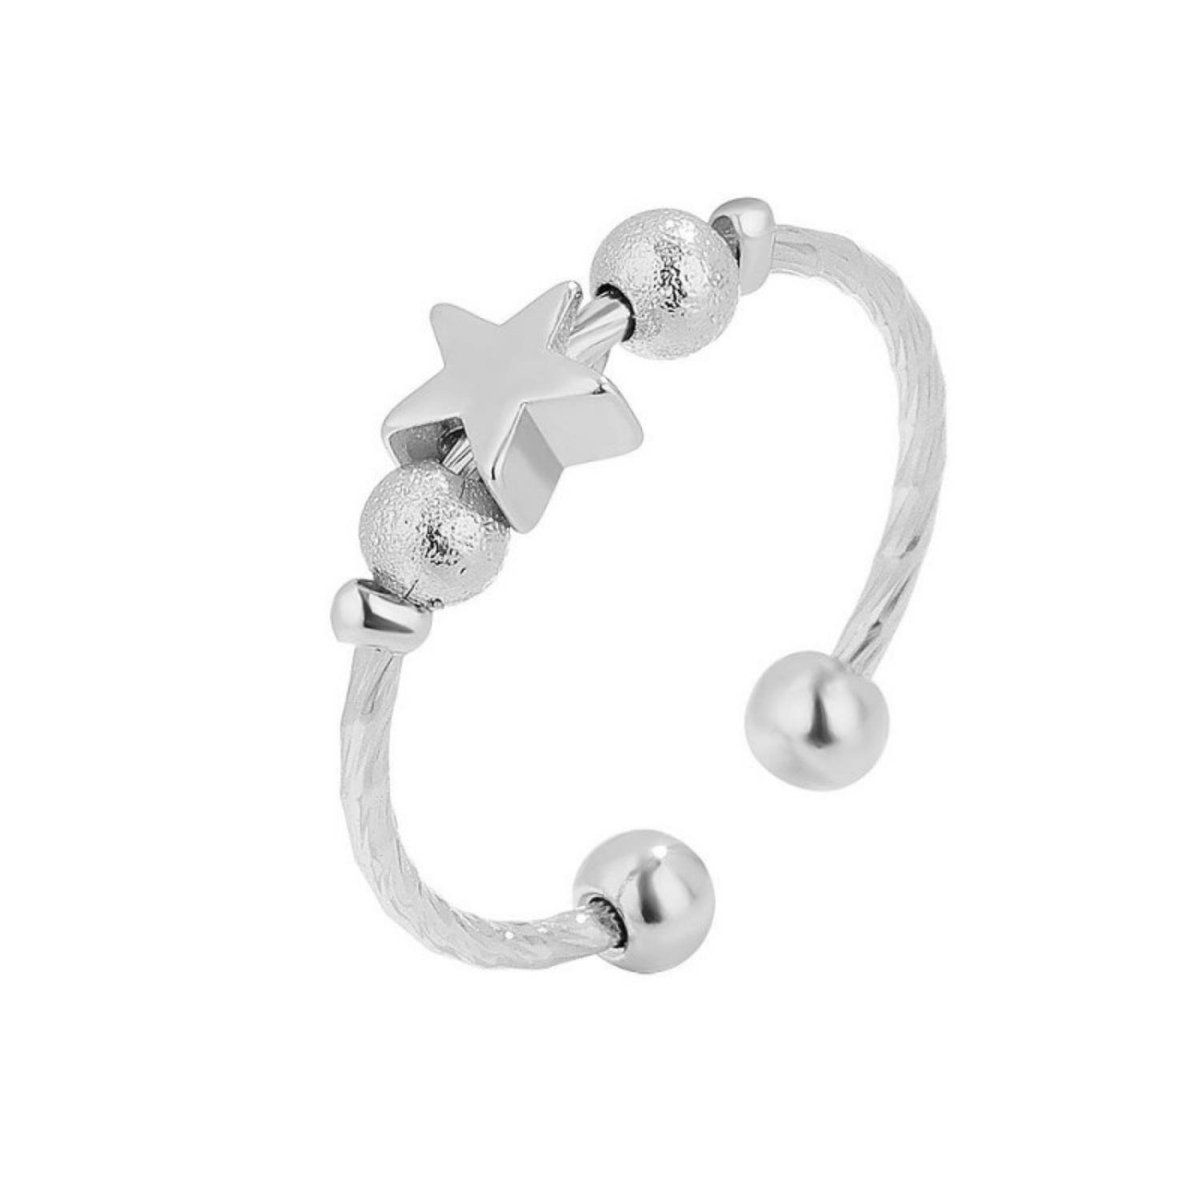 Anxiety Ring - (ster) - Stress Ring - Fidget Ring - Anxiety Ring For Finger - Draaibare Ring Dames - Spinning Ring - Spinner Ring - Zilver Plated